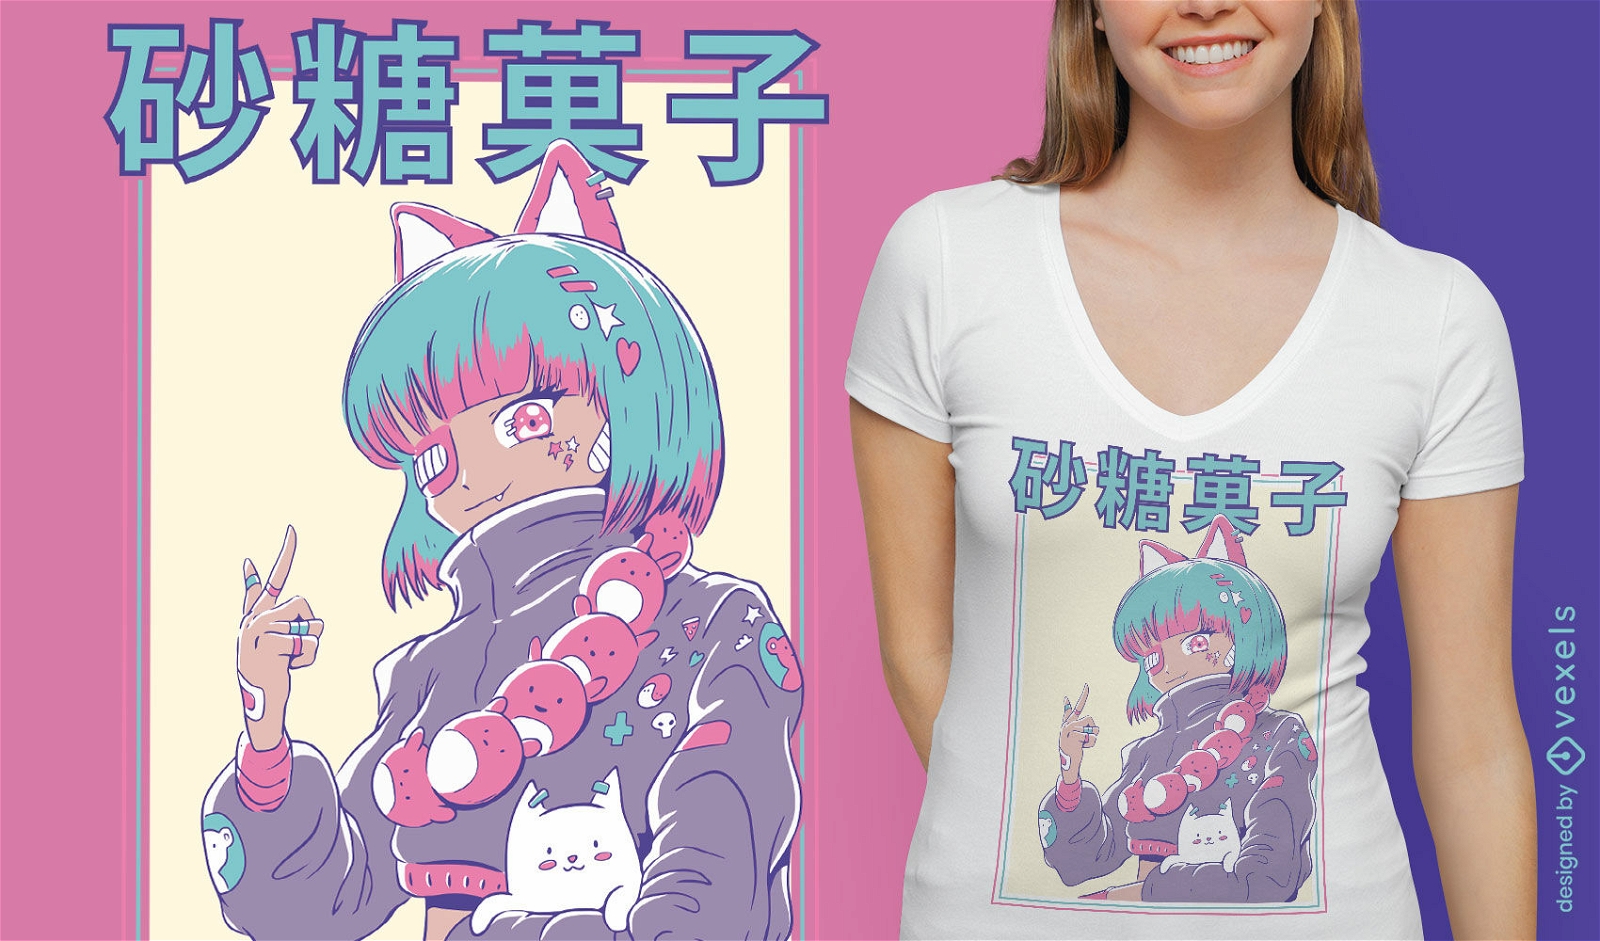 Cute anime girl with eye patch t-shirt design